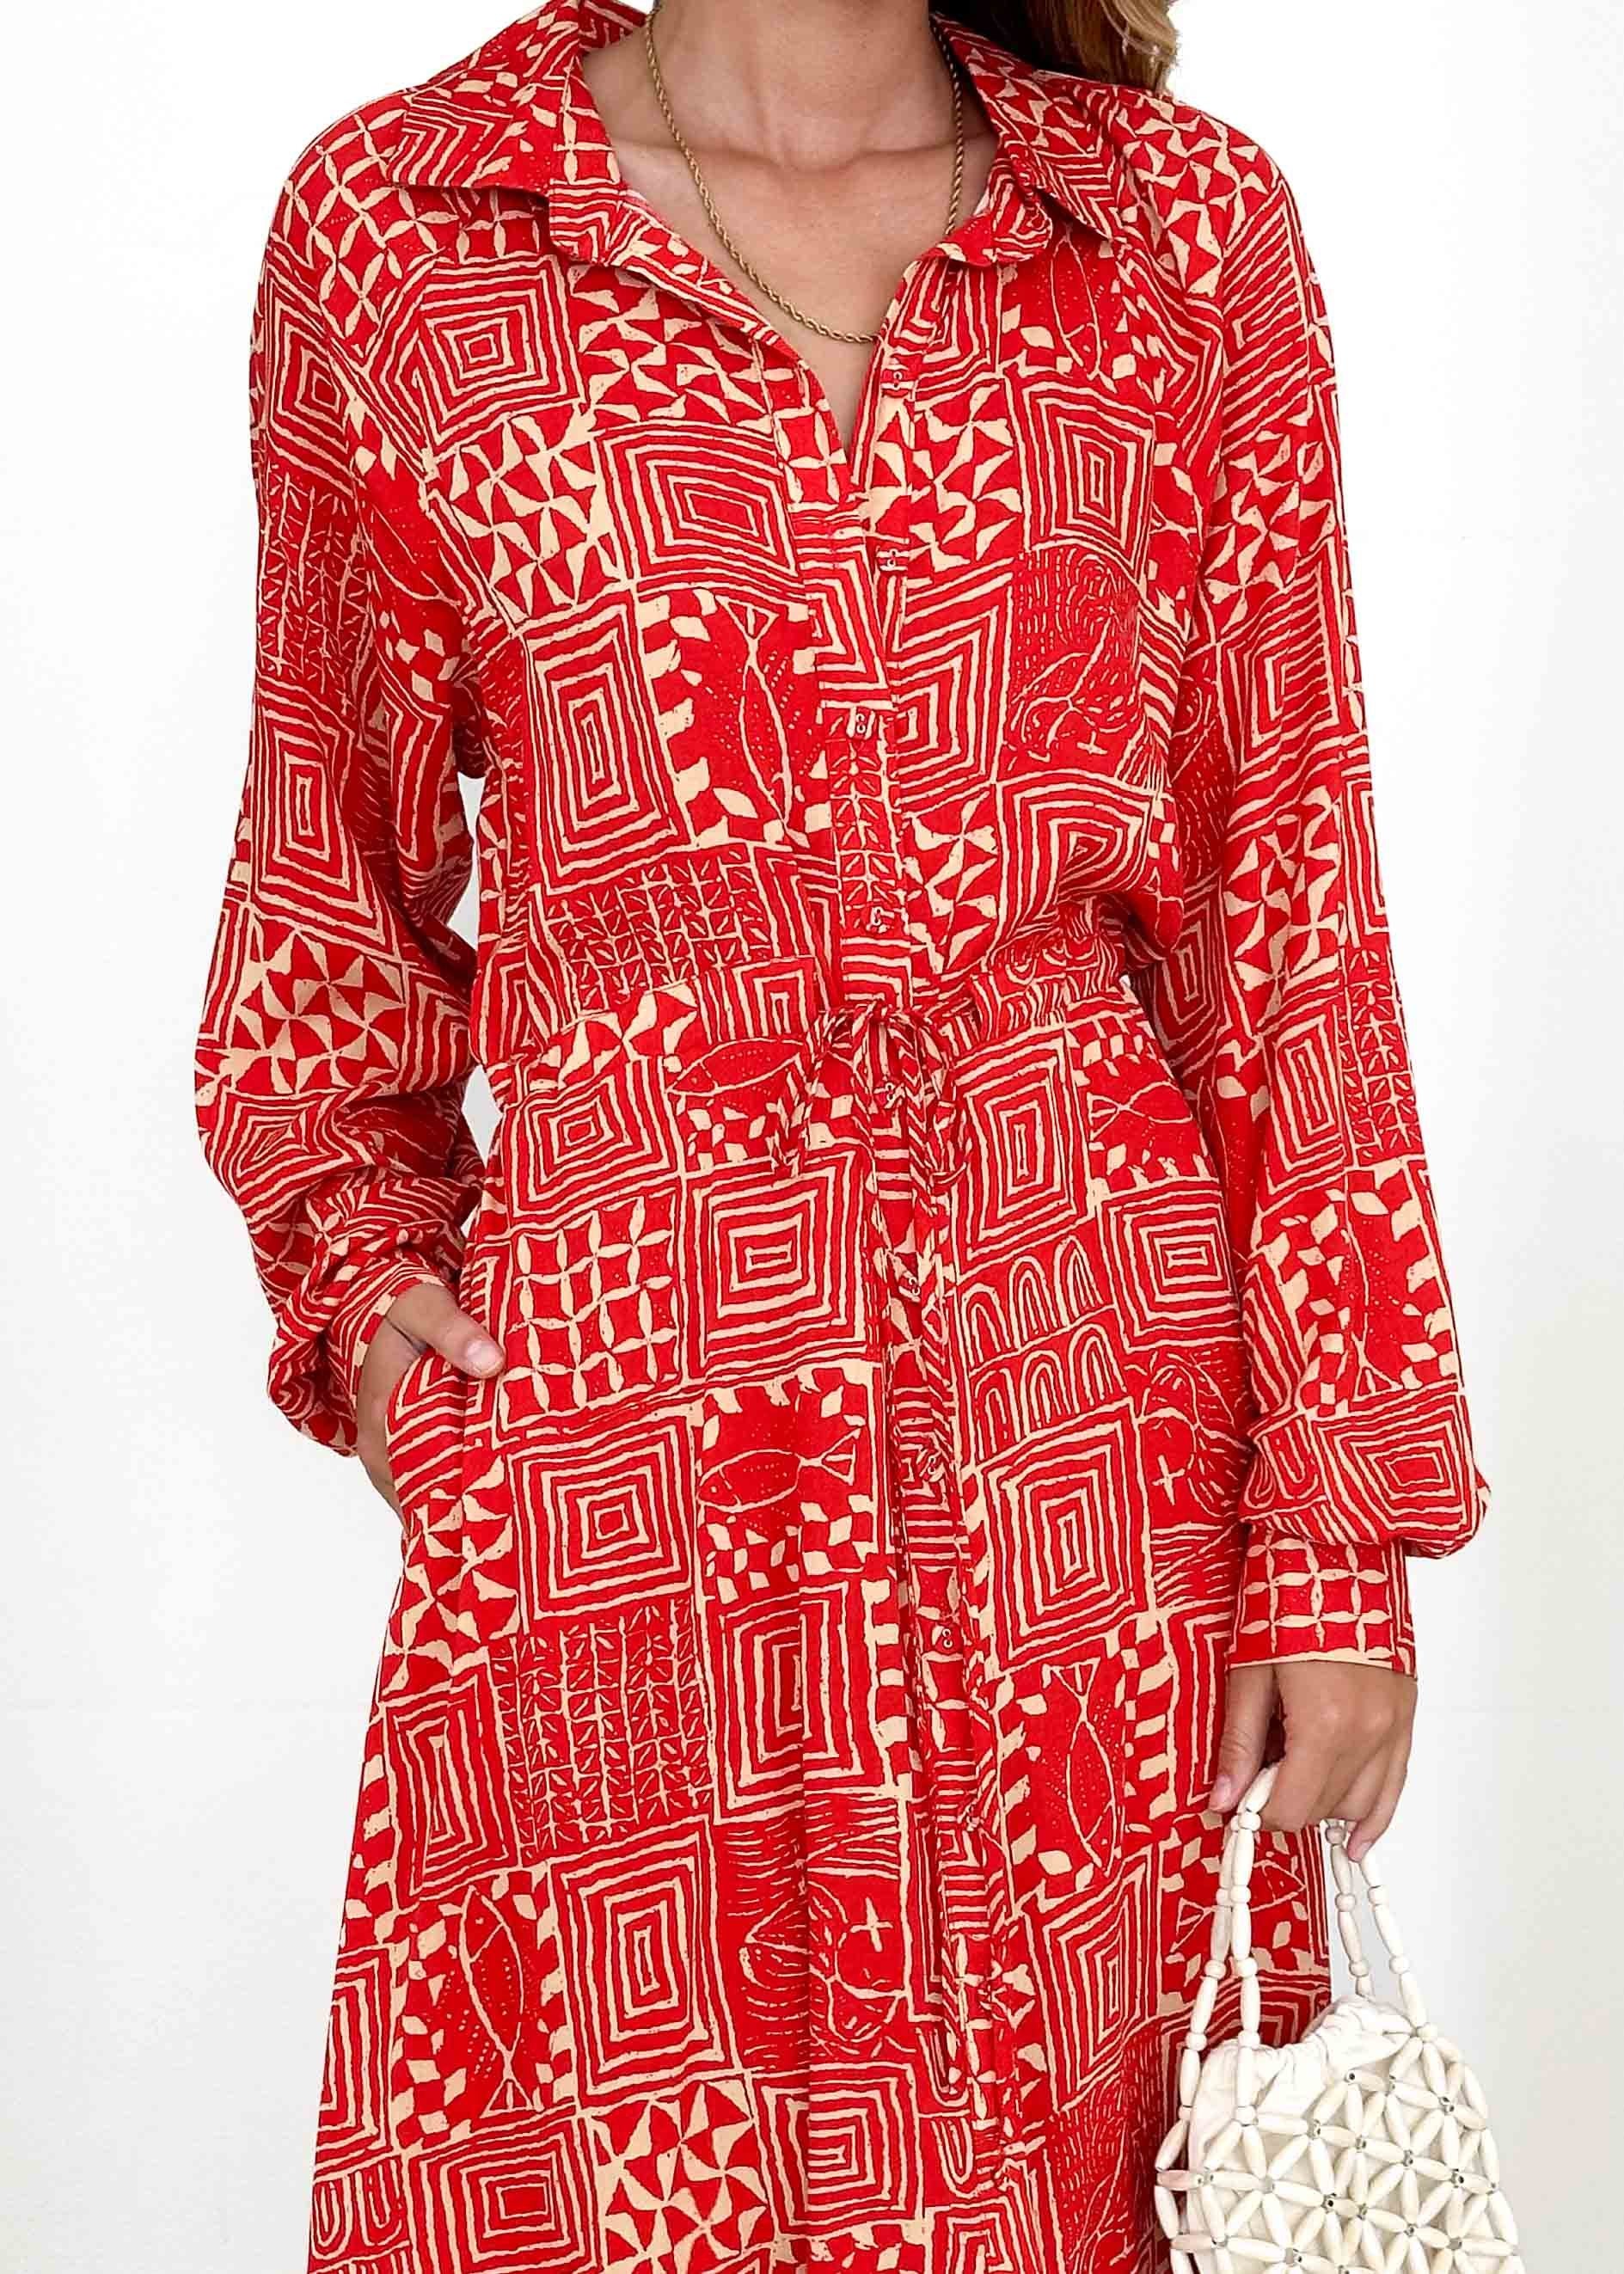 Tracklo Midi Dress - Red Abstract